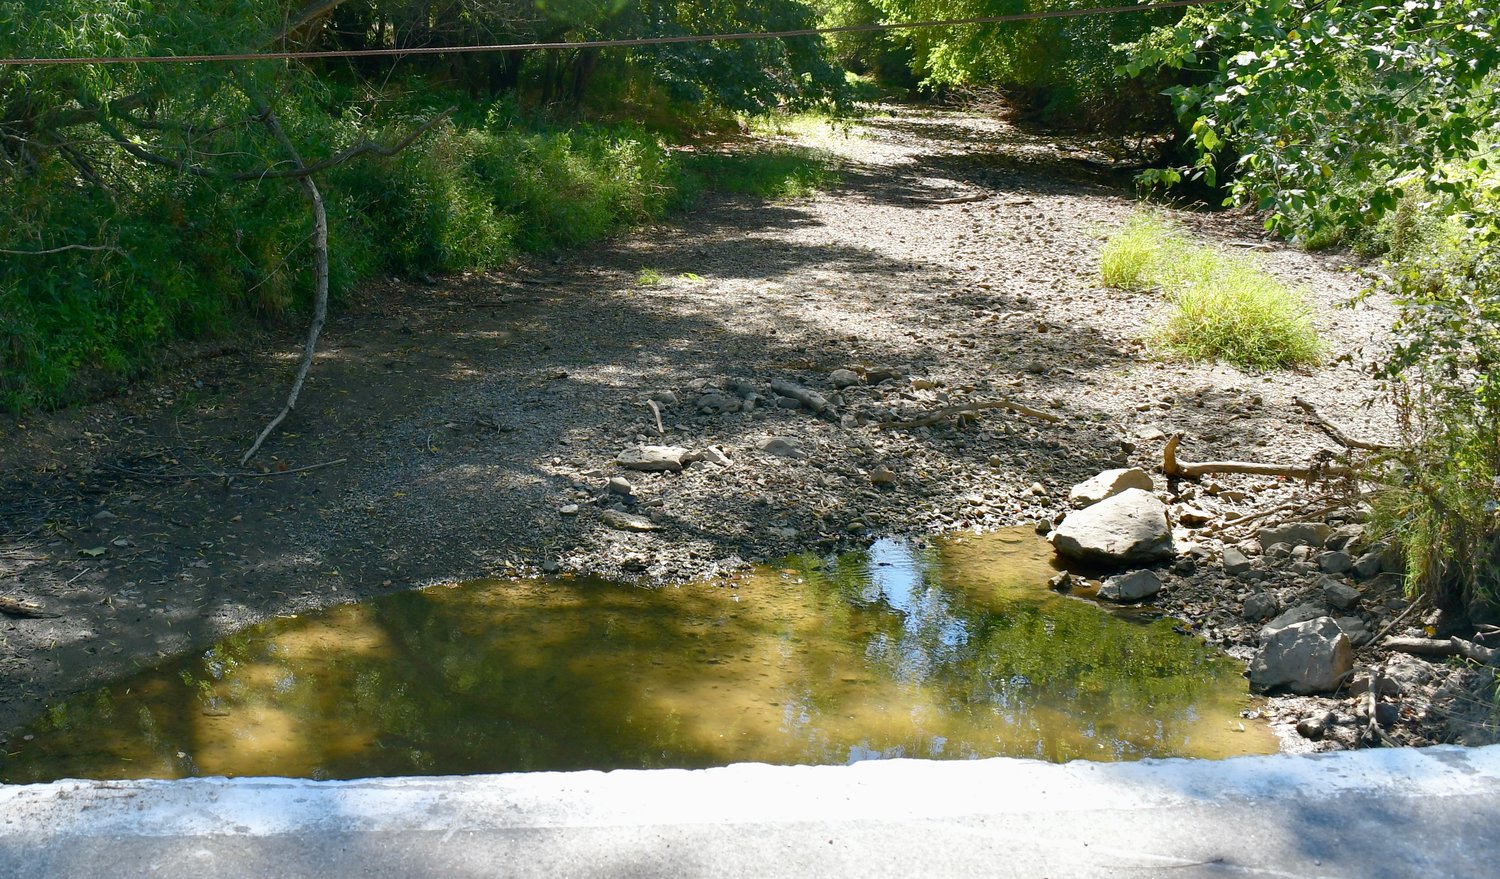 In late spring, Piper Creek was rolling over the bridge located on Mt. Gilead Road, now it is down to a very small puddle of water.